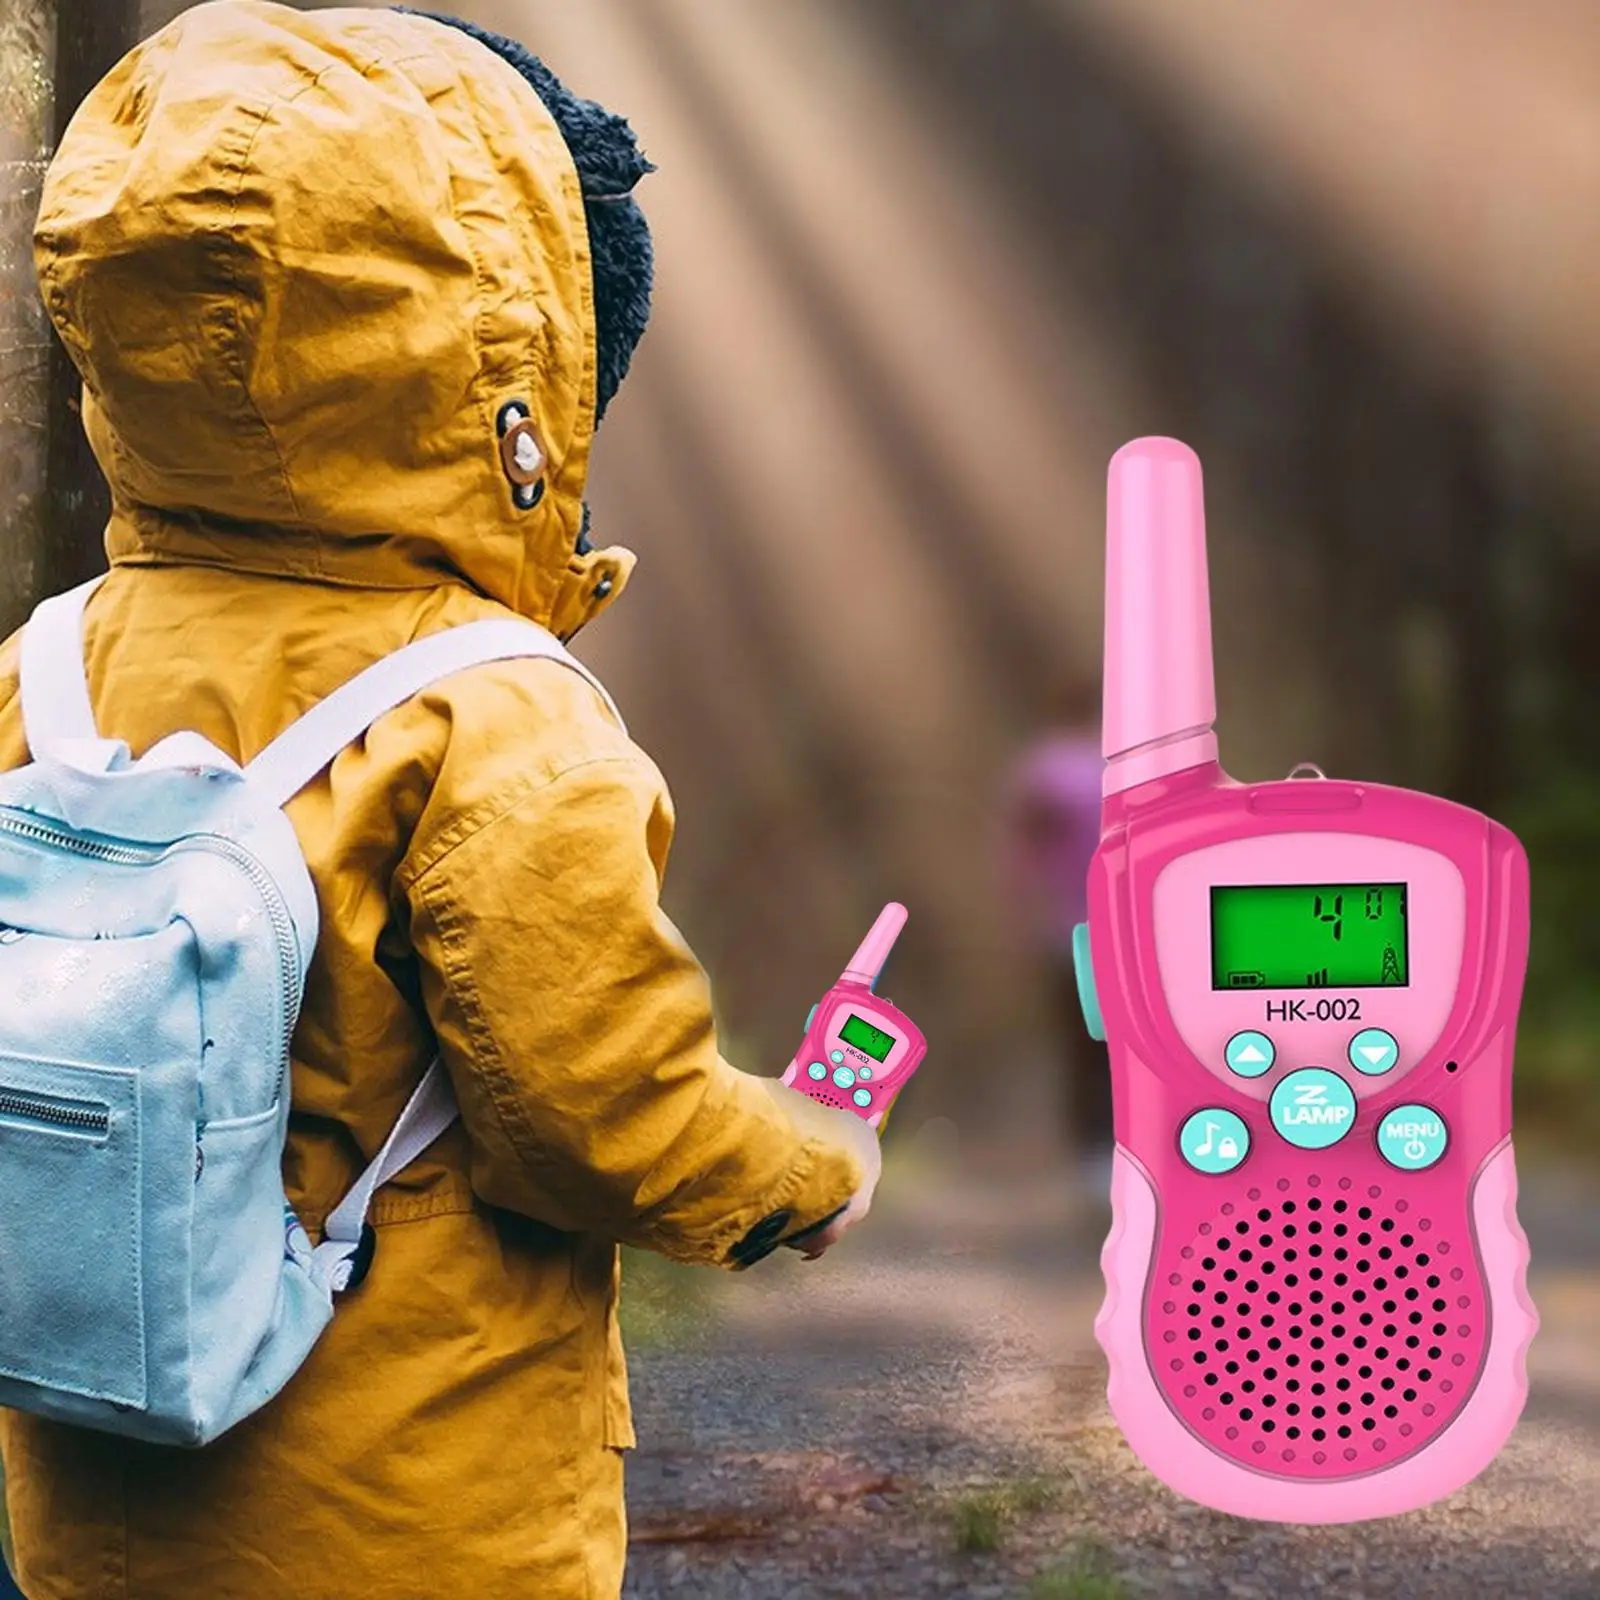 2x Children Walkie Talkie with Belt Clip 2km Range Birthday Gift Walky Talky Toy for Games 3-14 Years Old Outdoor Camping Hiking